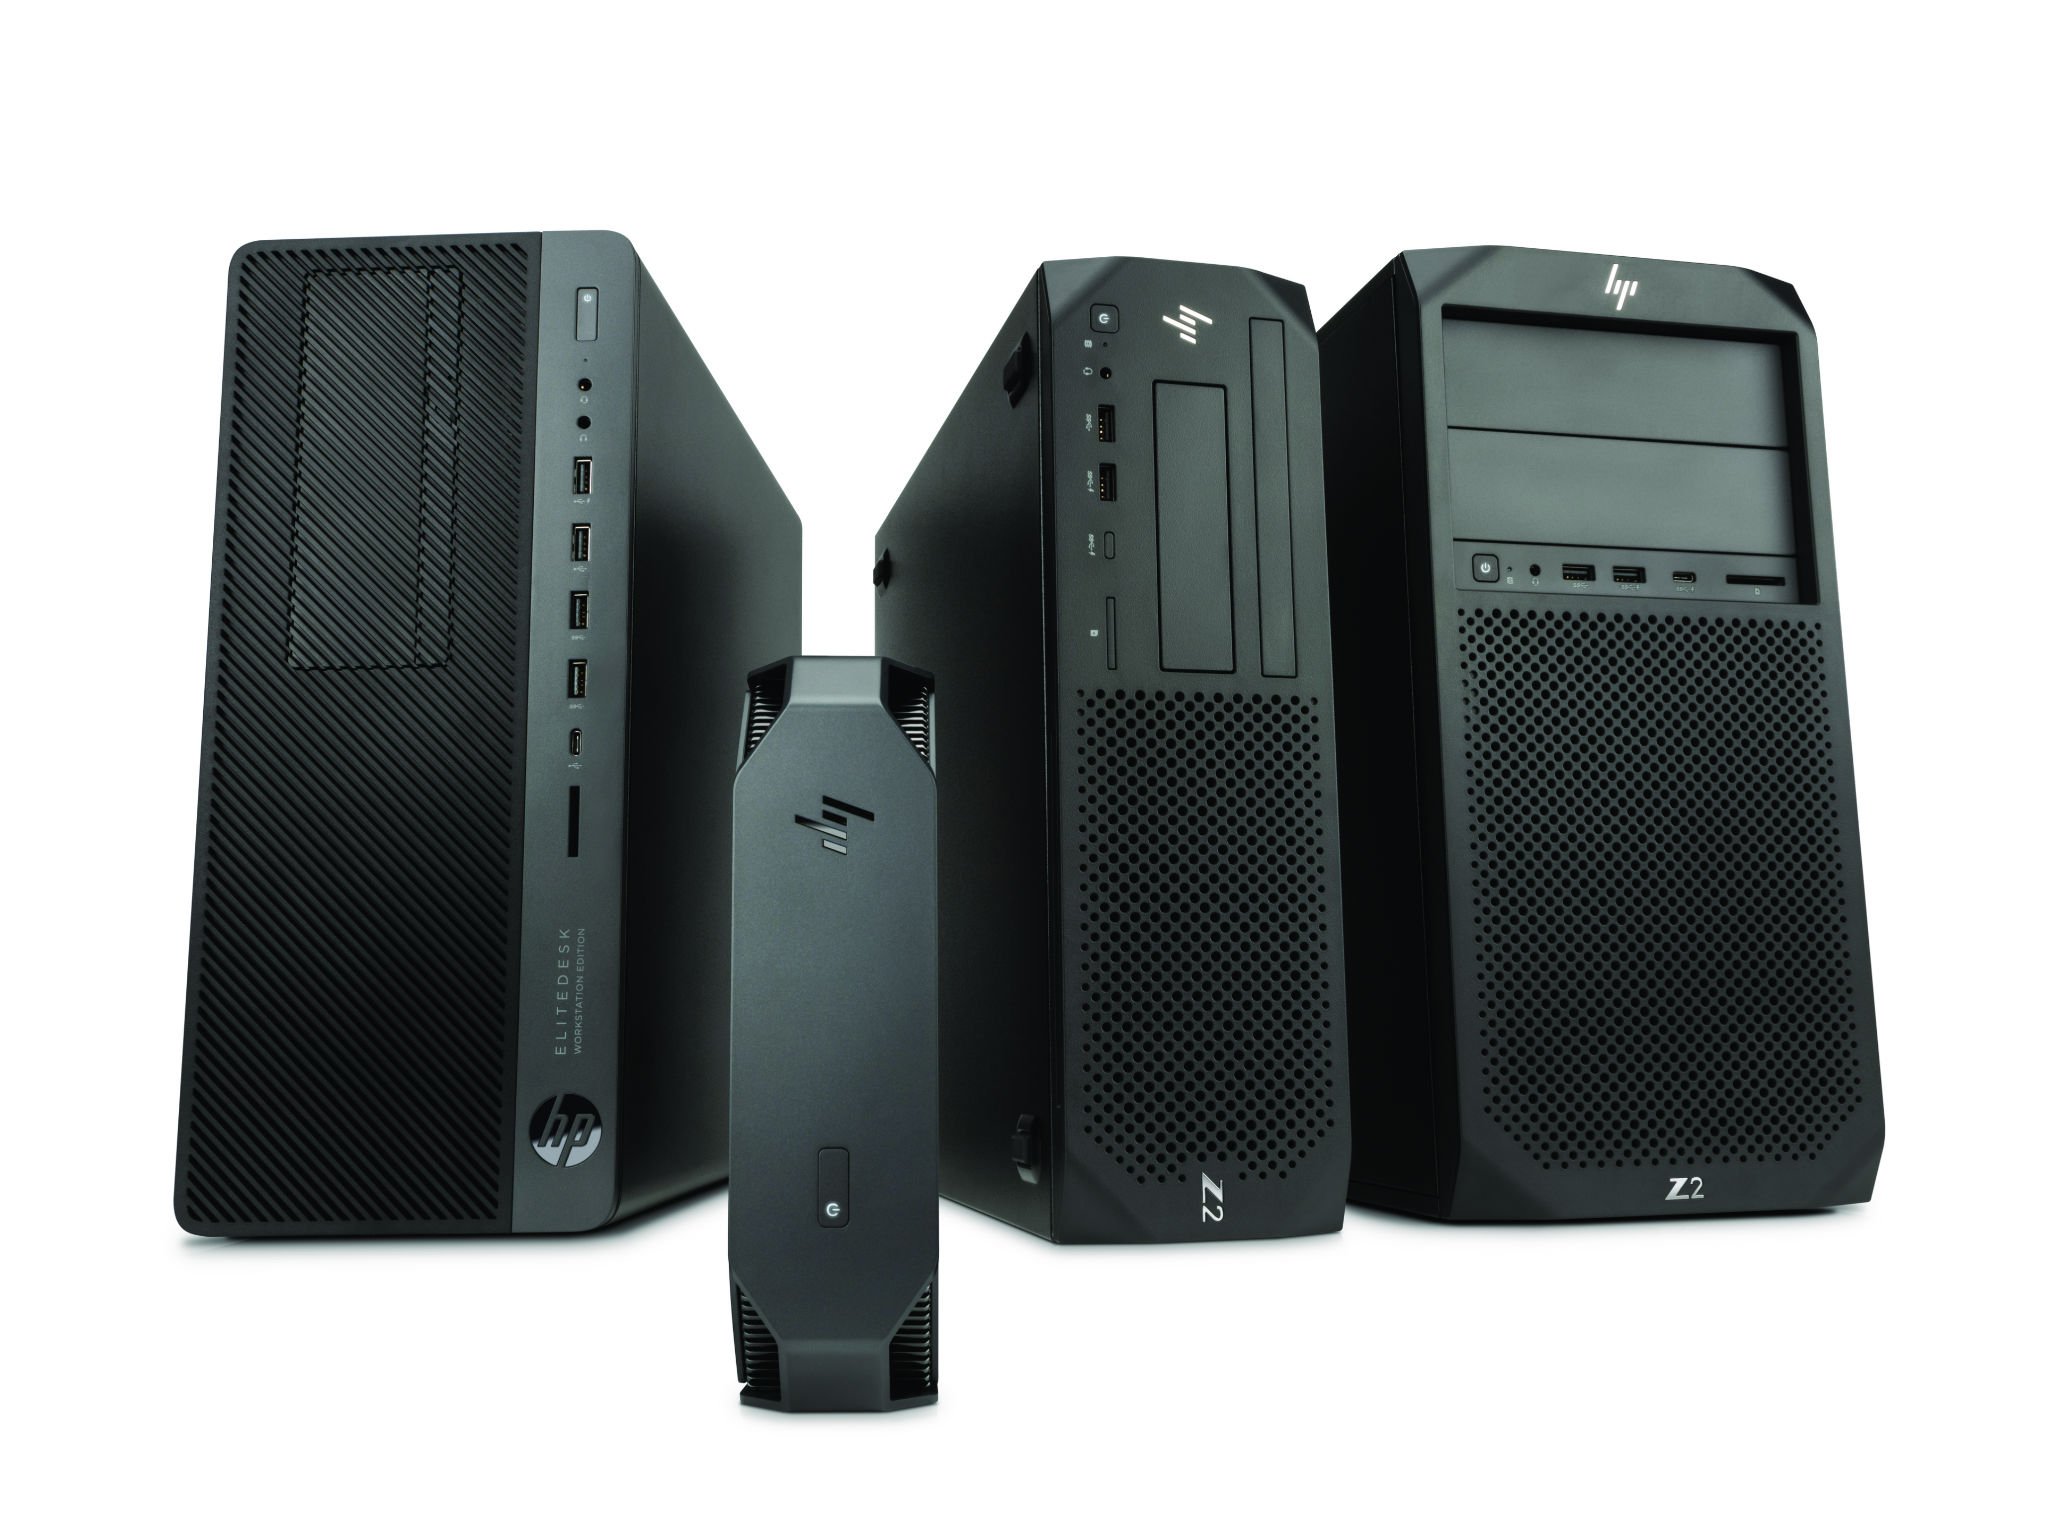 HP's new Z family workstations are towers of power